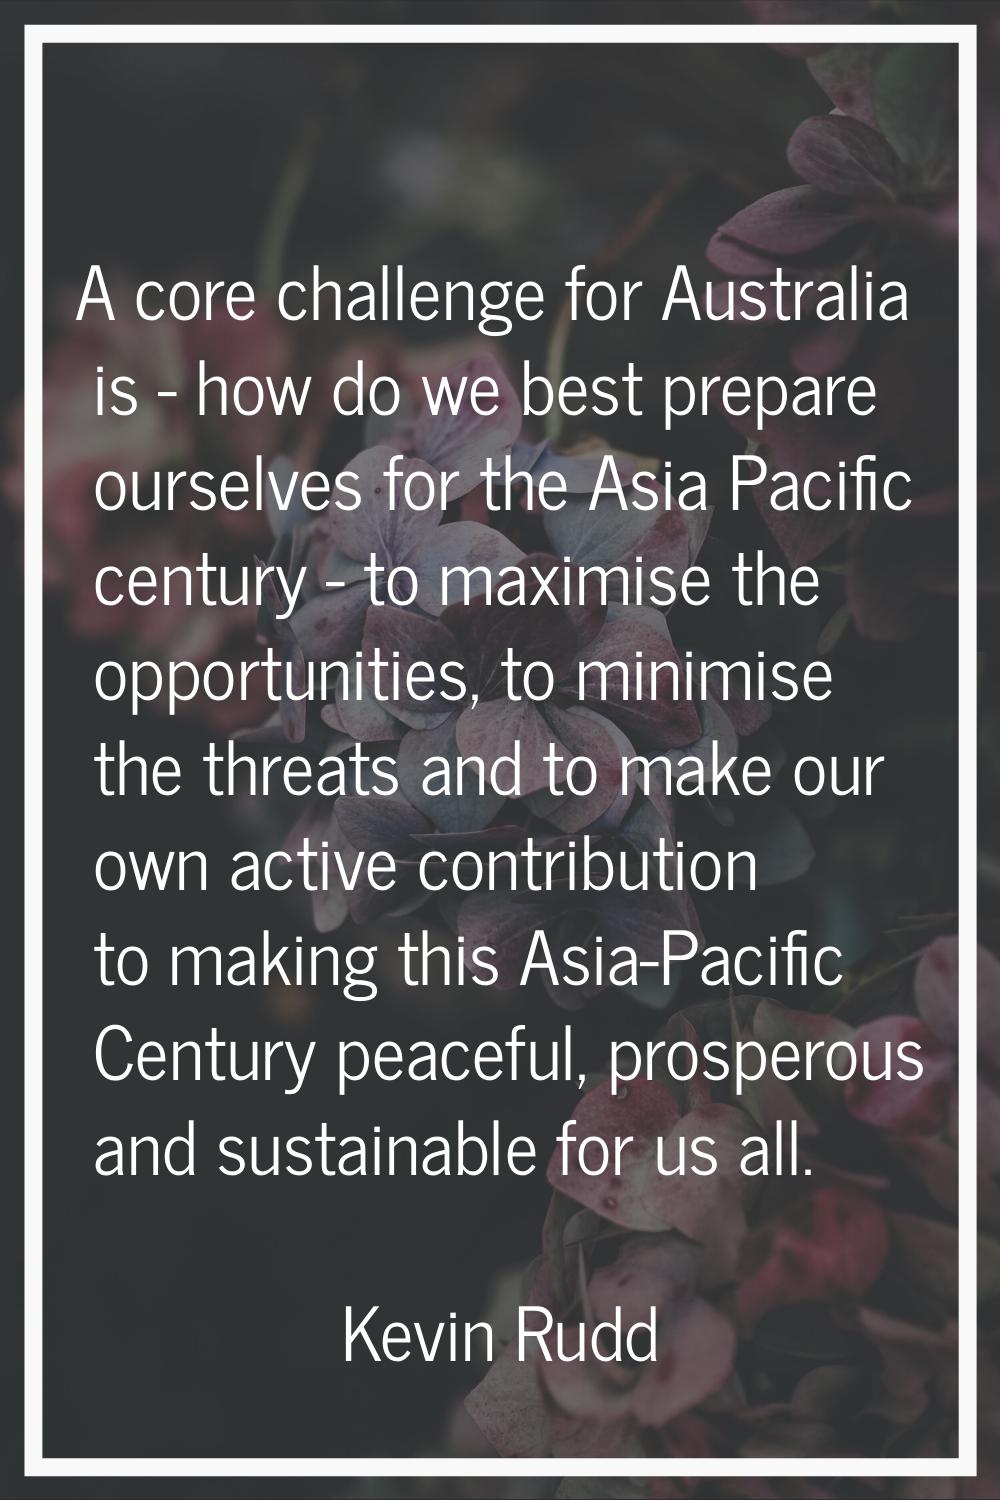 A core challenge for Australia is - how do we best prepare ourselves for the Asia Pacific century -